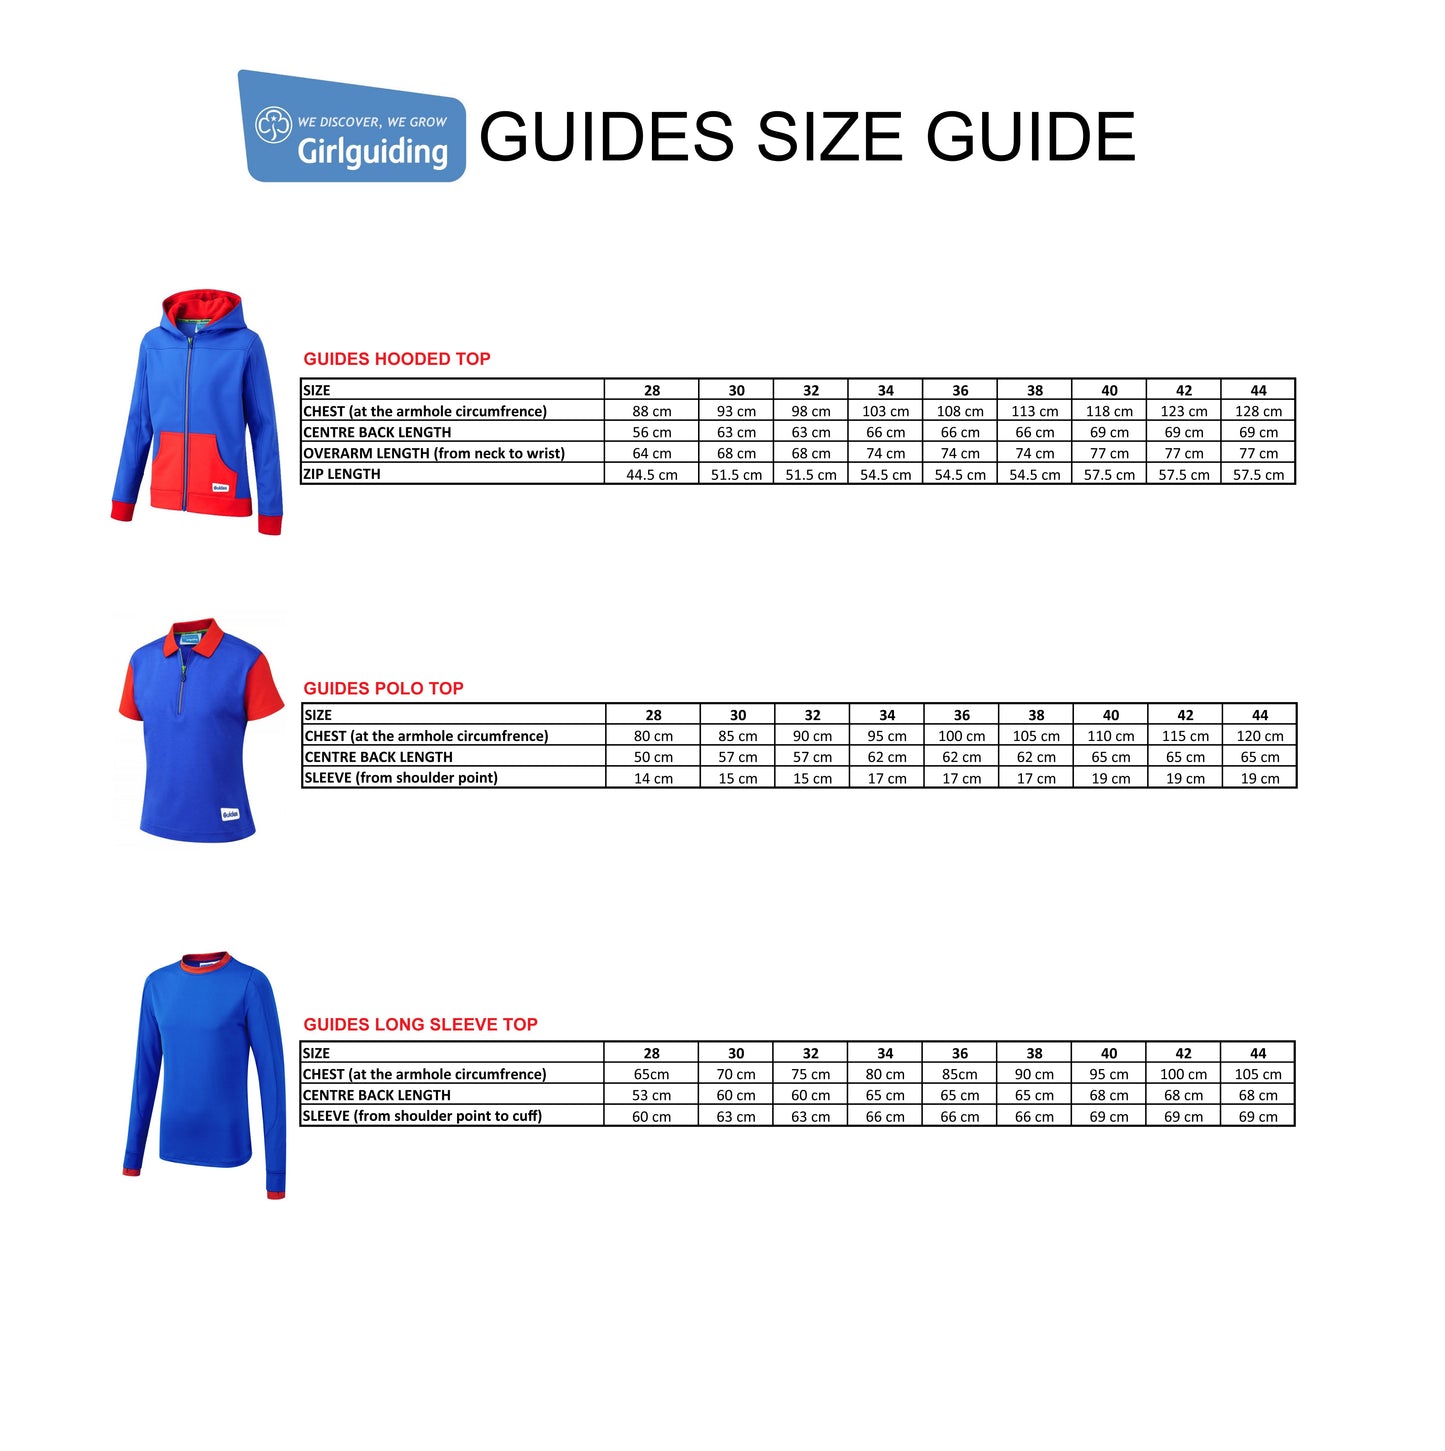 GUIDES HOODED TOP